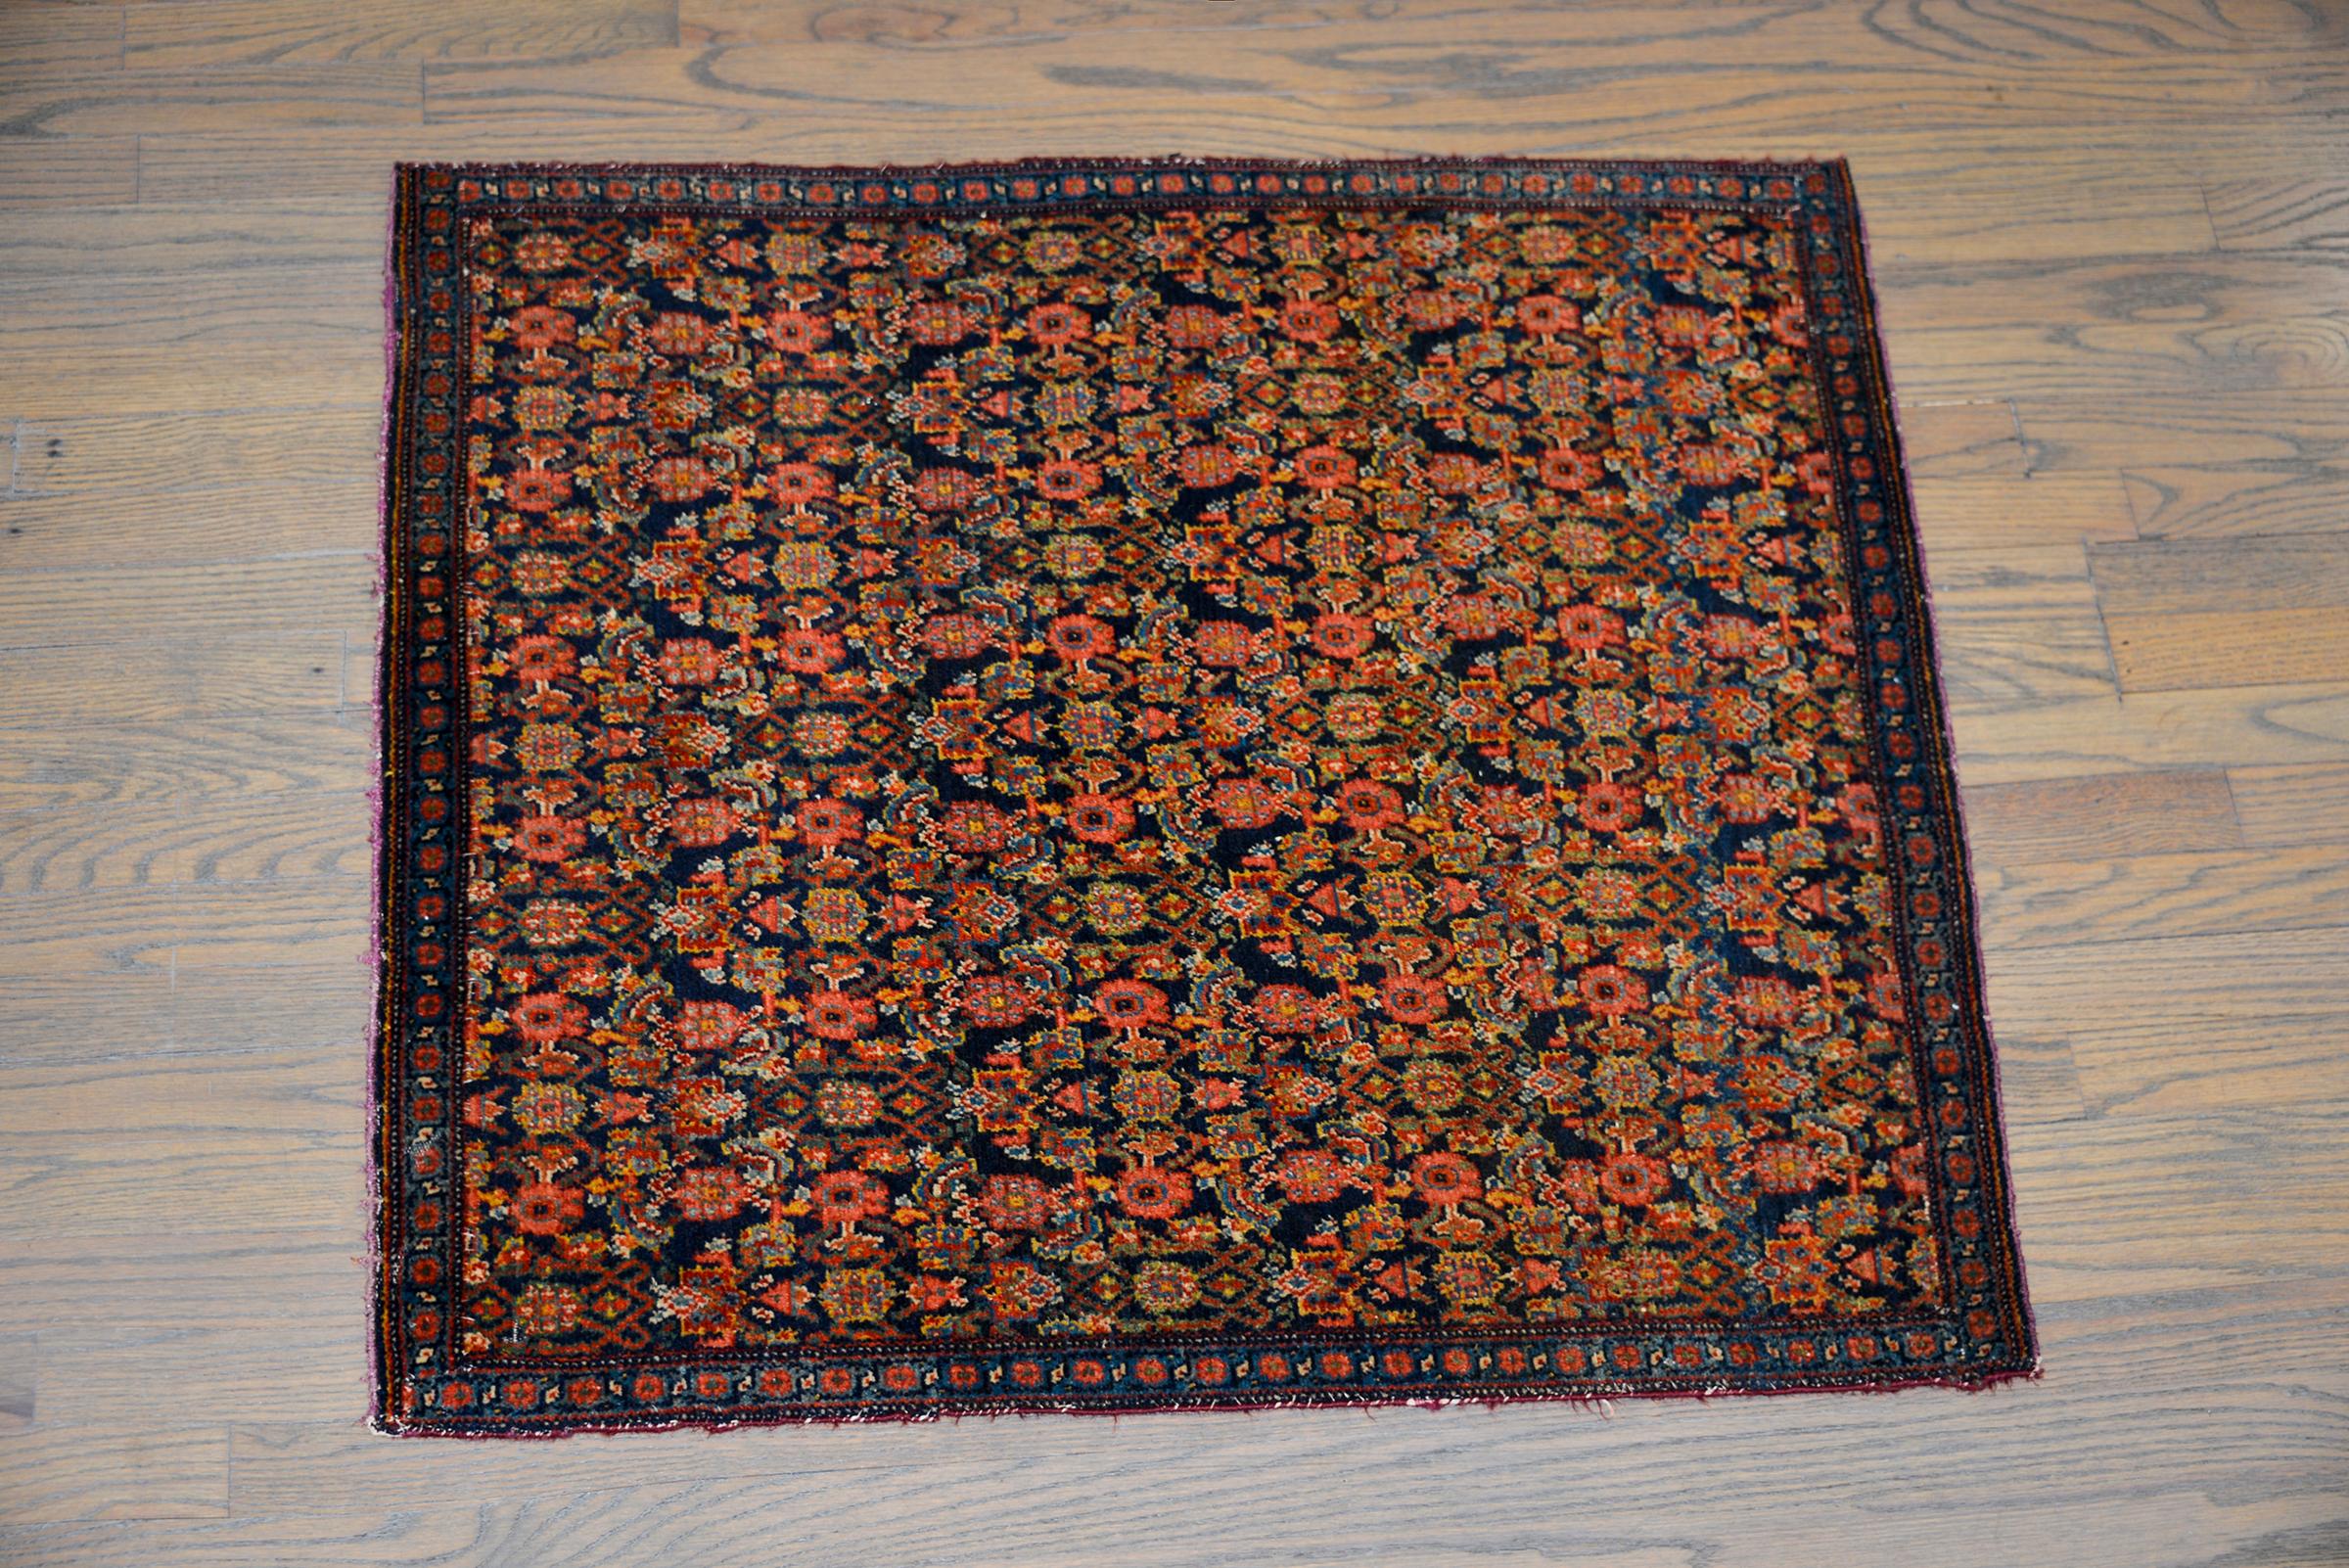 An incredible early 20th century Persian Senneh rug with an all-over trellis floral pattern woven in myriad colors including crimson, gold, green, light indigo, and pink, and set against a dark indigo background.